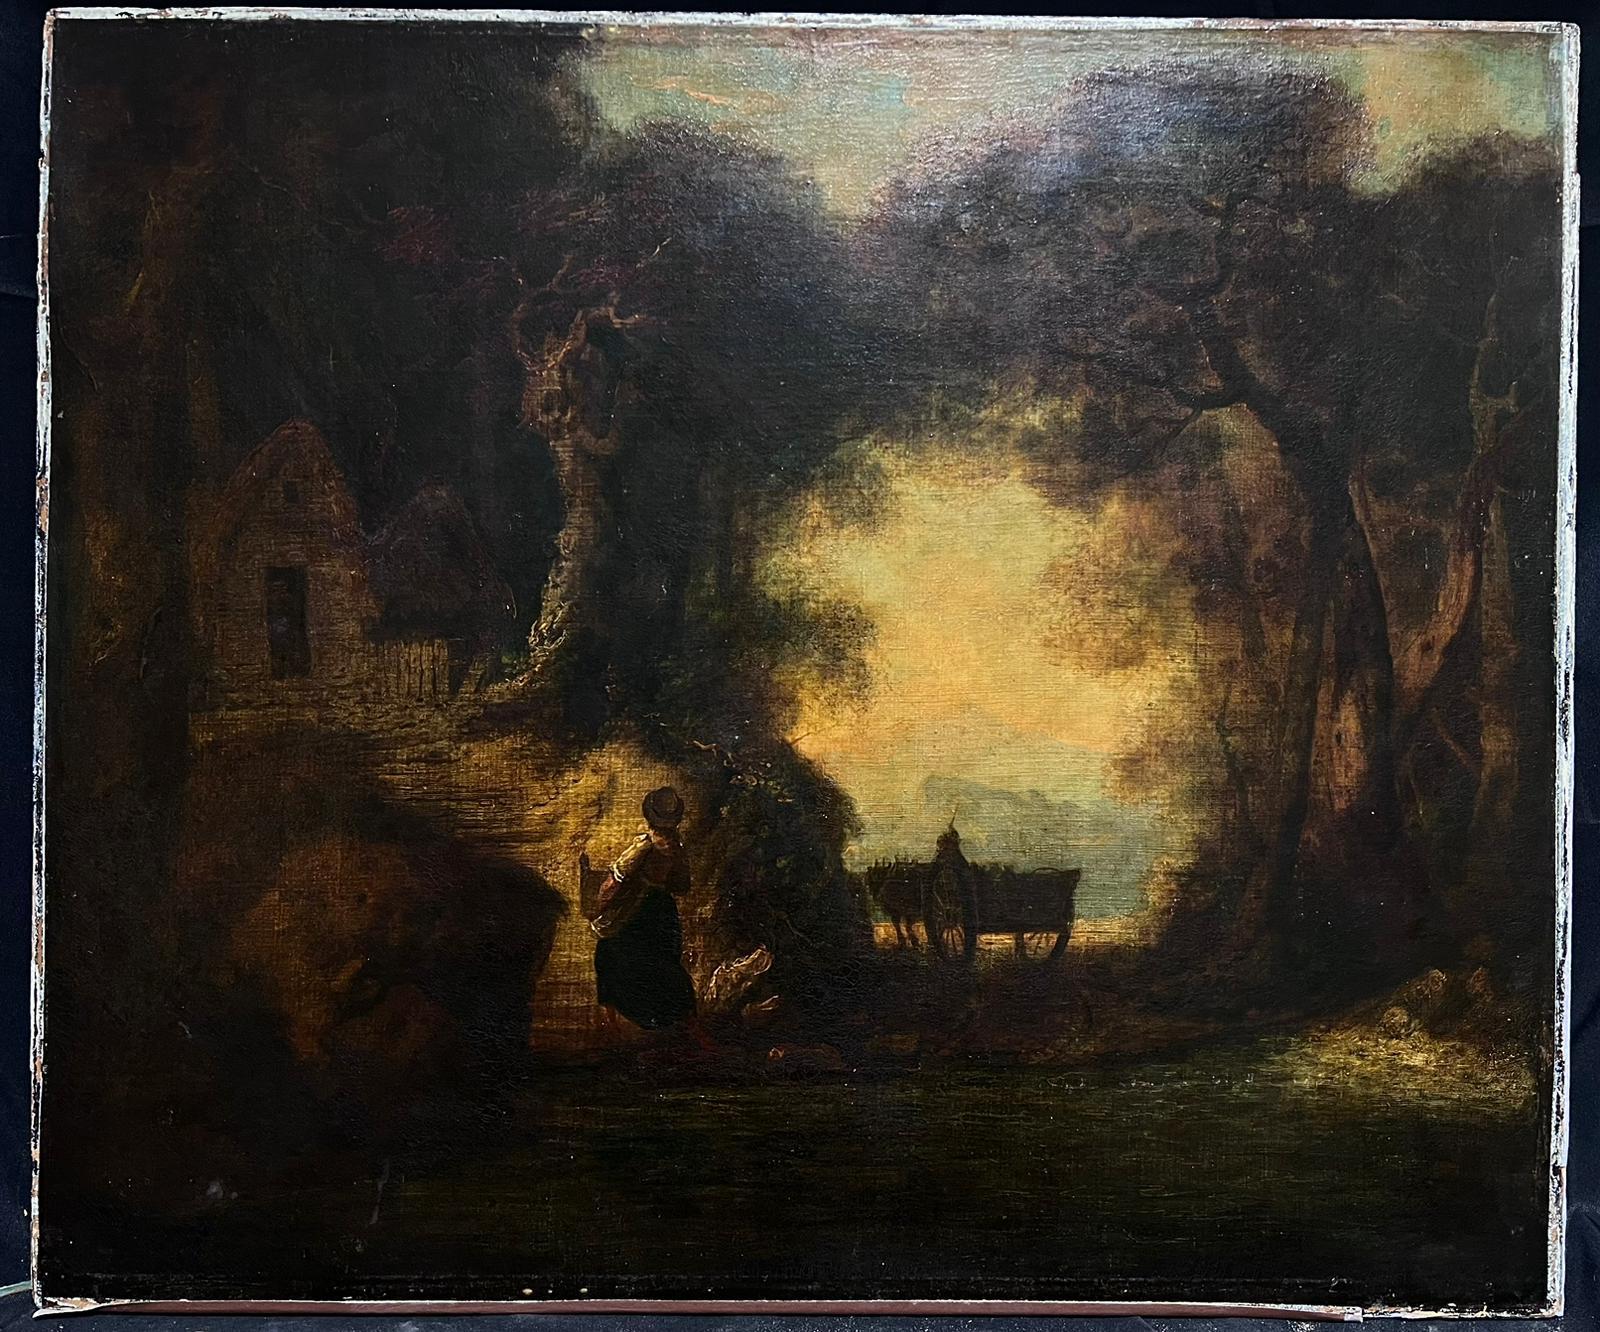 The Close of Day
English artist, second half 18th century
circle of Thomas Gainsborough (British 1727-1788)
oil on canvas, unframed
canvas: 24.5 x 29 inches
provenance: private collection, England
condition: very good and sound condition; the edges